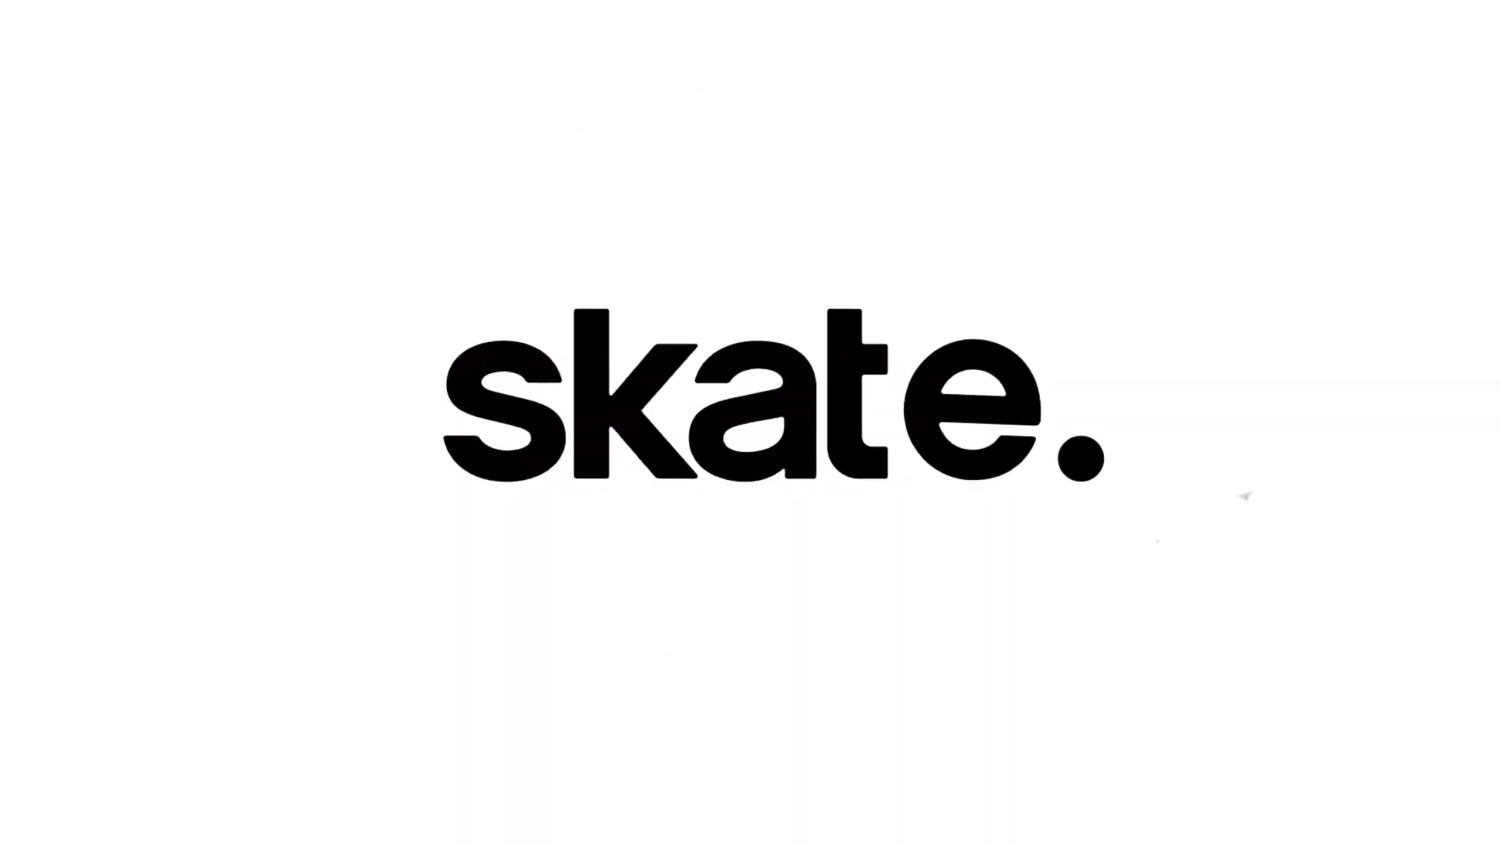 Skate 4 is officially 'skate.' & will be free-to-play